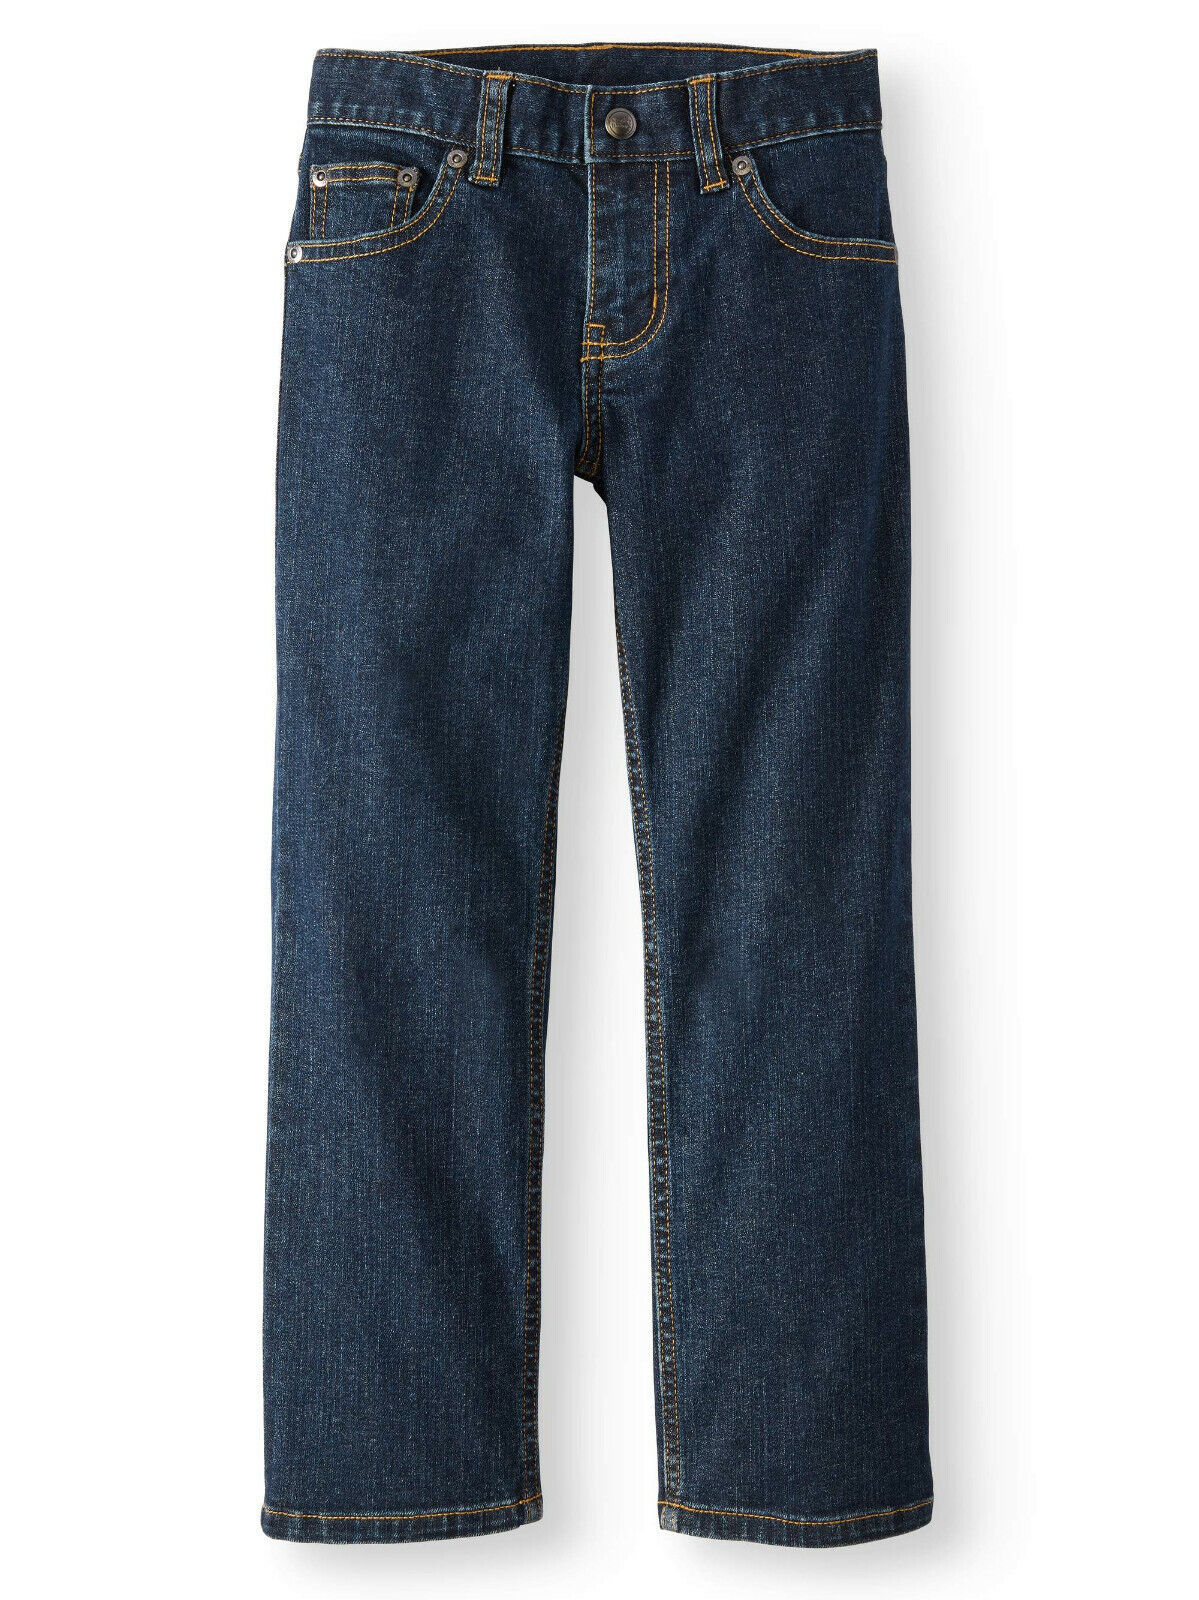 Primary image for Wonder Nation Boys Relaxed Jeans Dark Wash Size 12